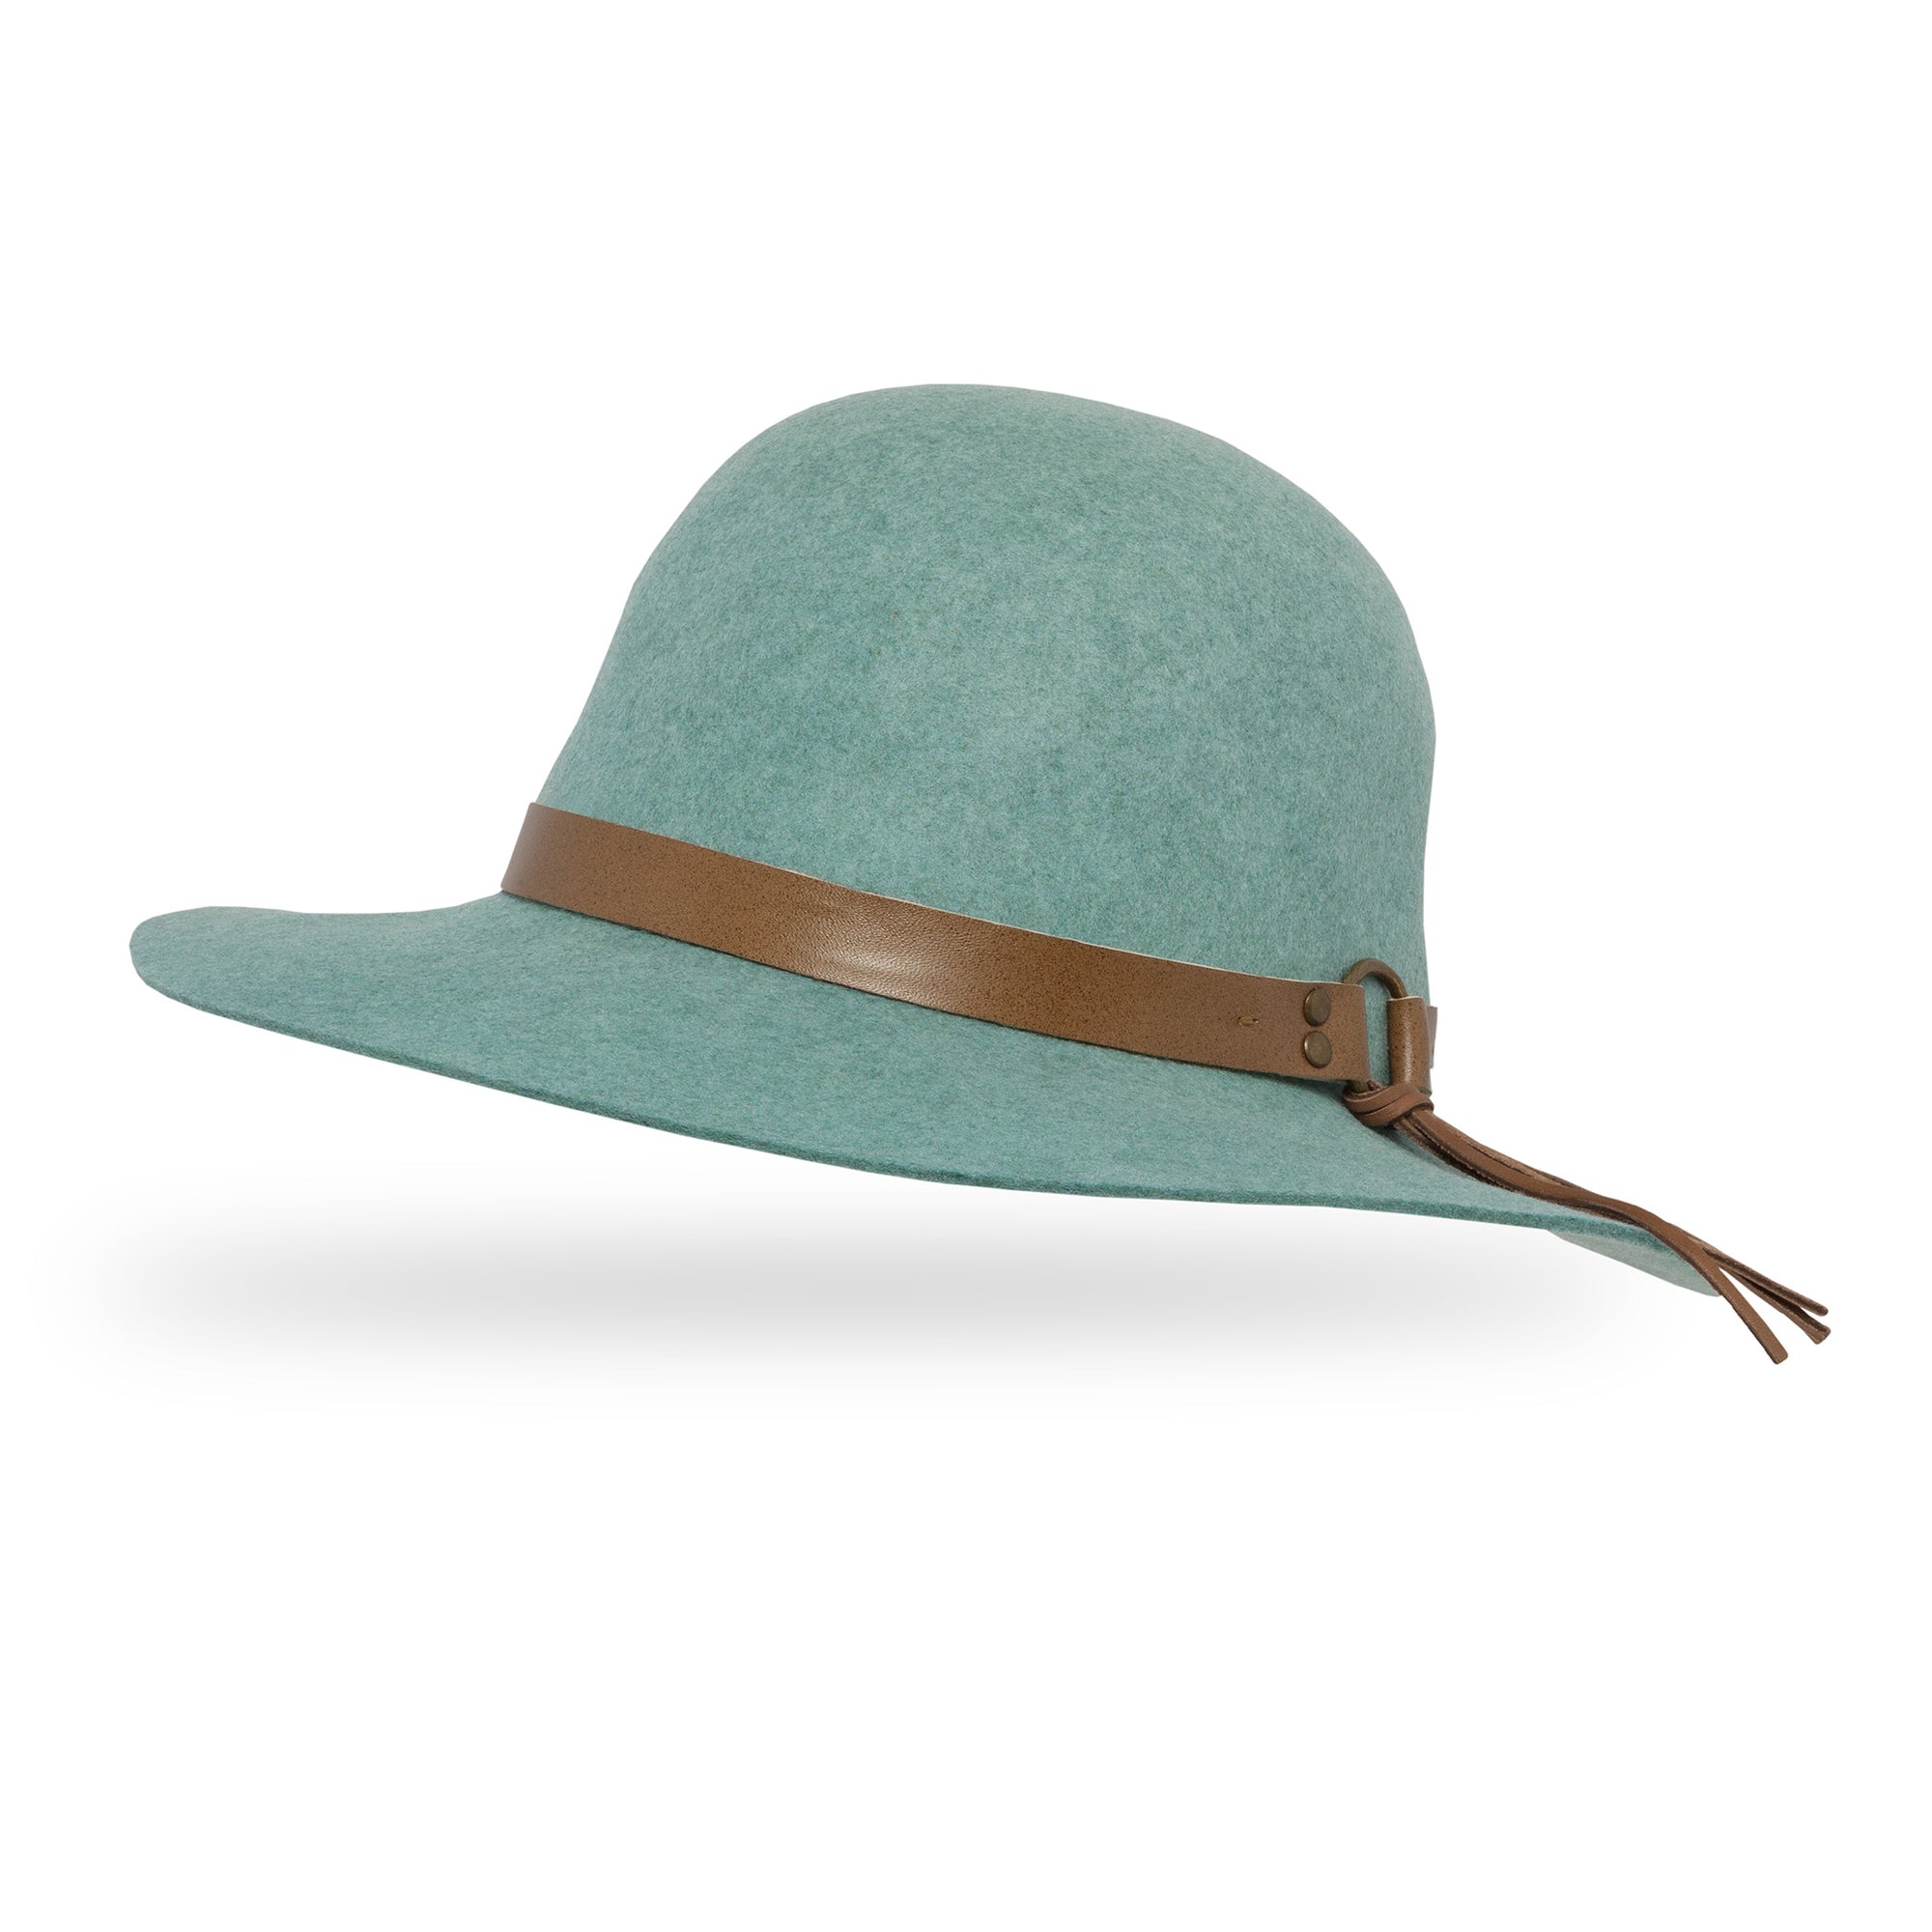 taylor hat in blue with leather band in brown